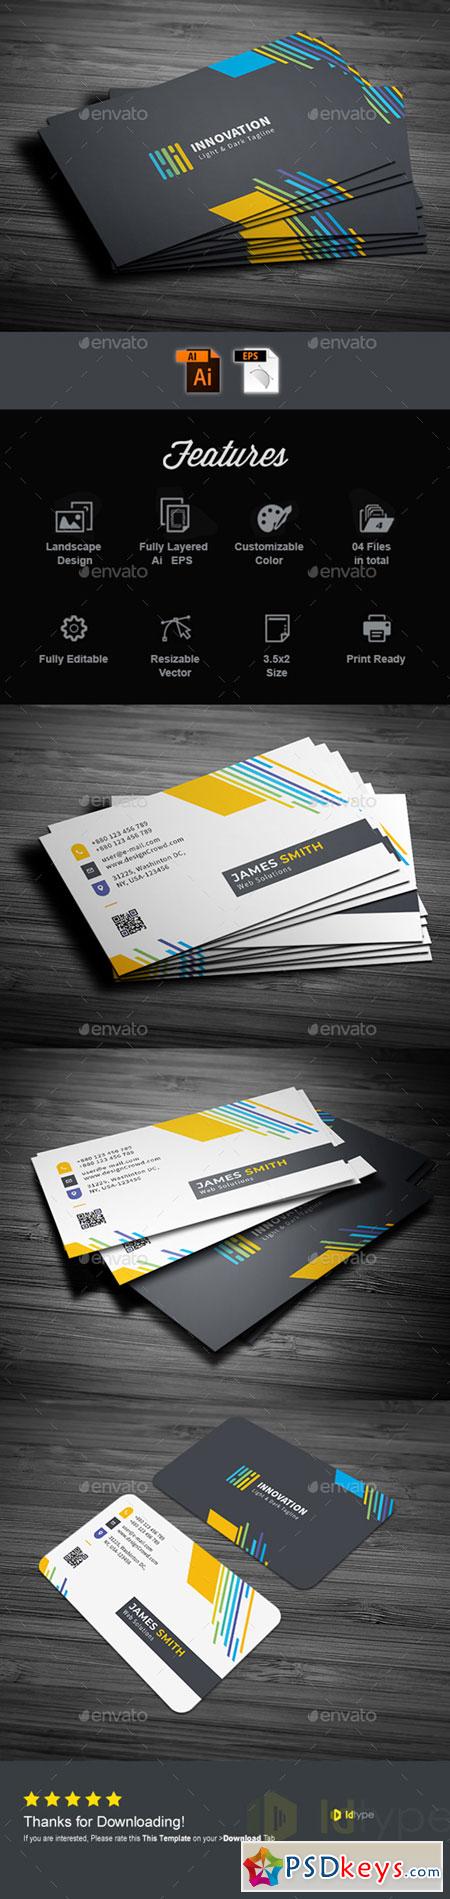 Business Card 22604474